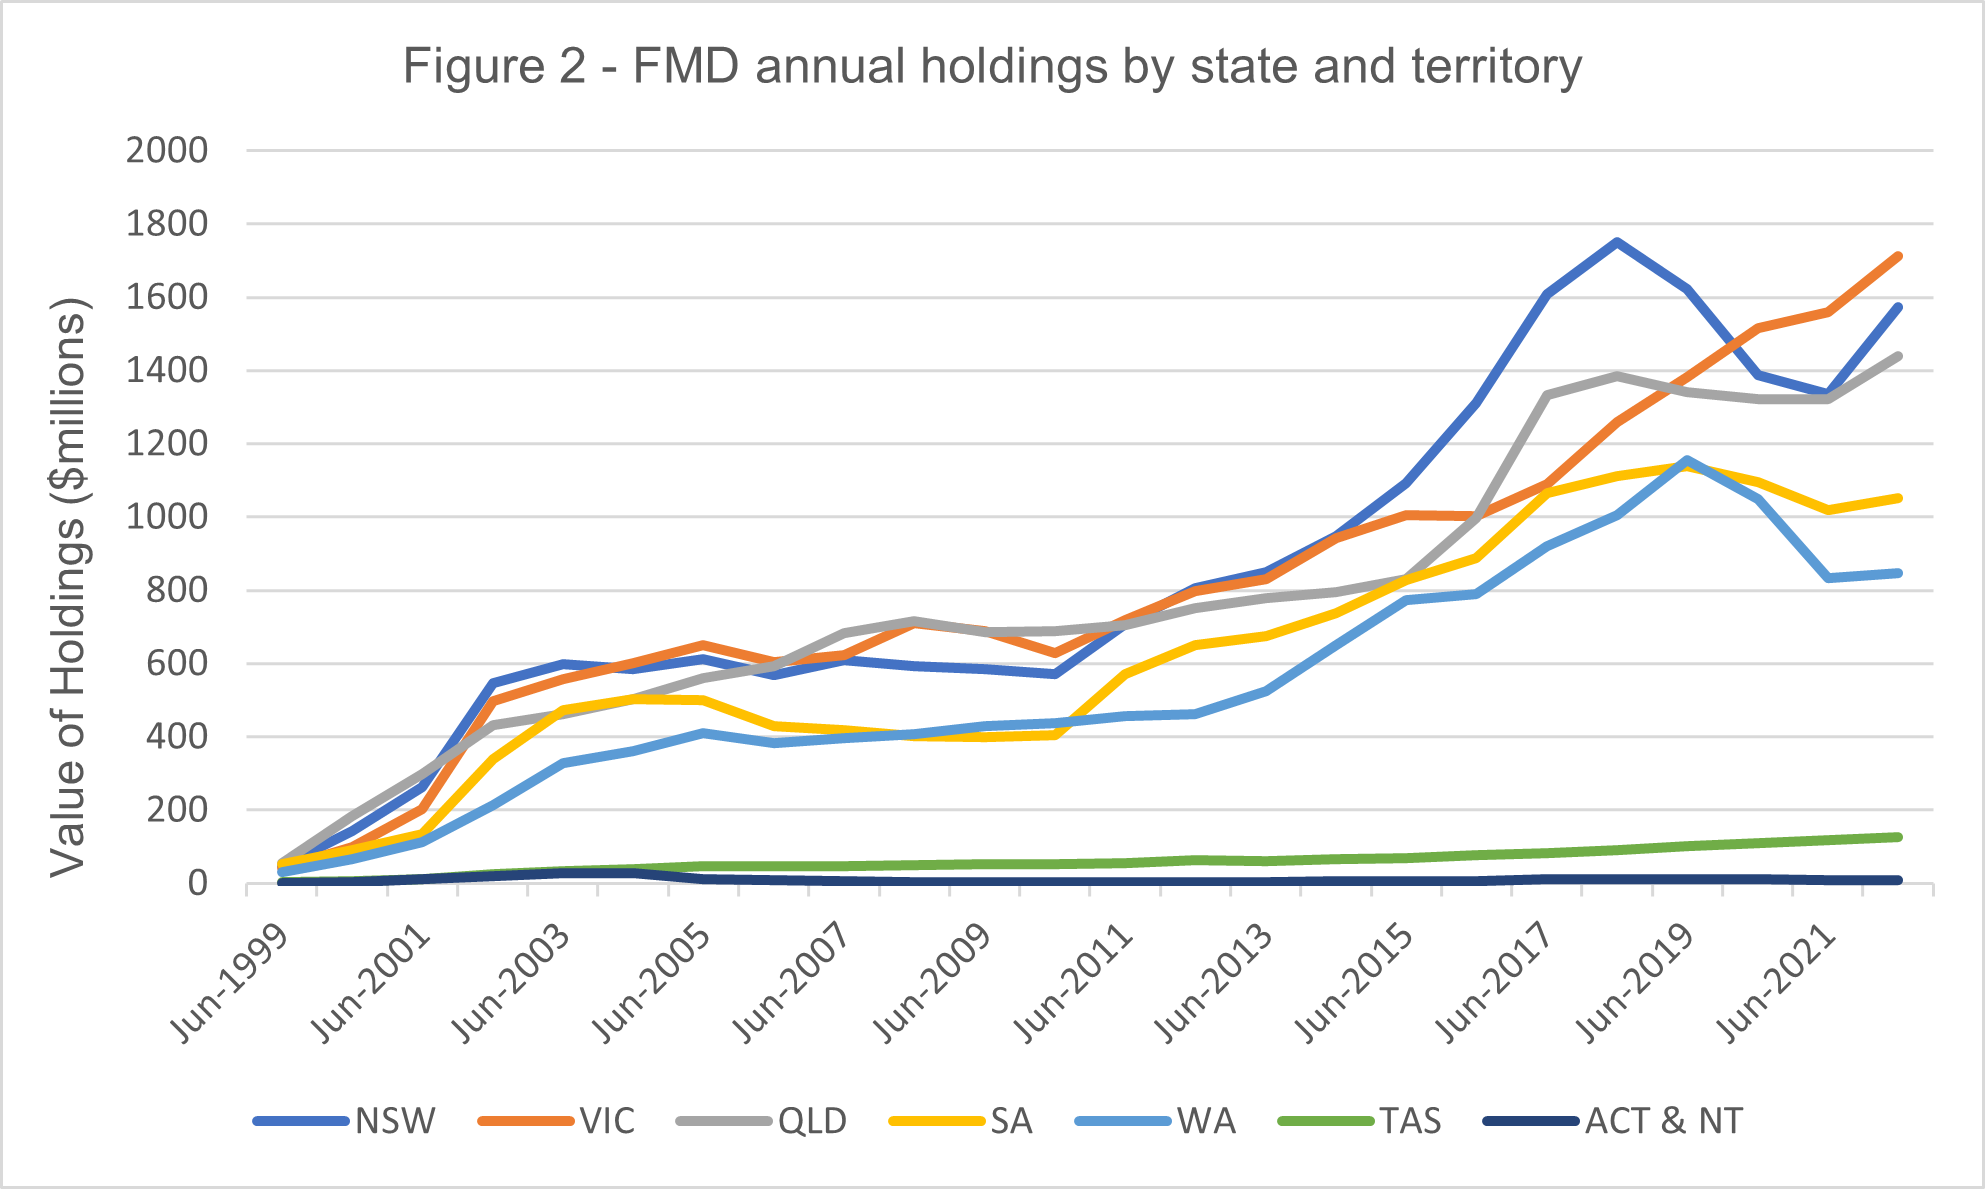 A graph showing the value of annual holdings in FMD in millions per Australian state. All states show a decline from 2019 to 2021.